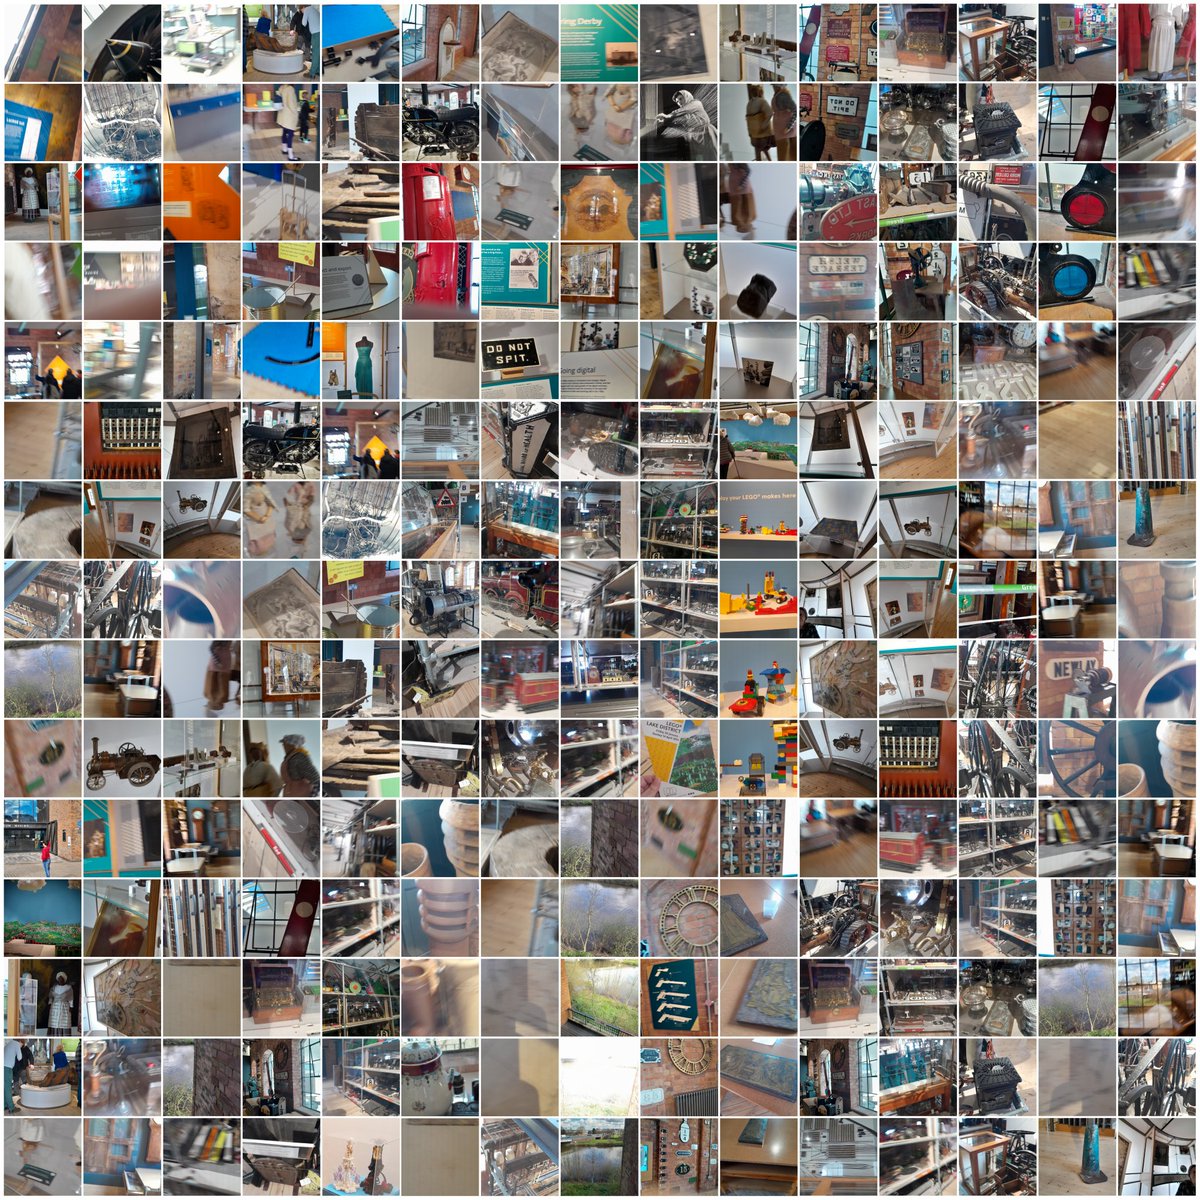 Yesterday, I went to @MuseumofMaking with my neighbours' son. He asked if he could use my phone to take a few photos of things that interested him. He took 225 photos.